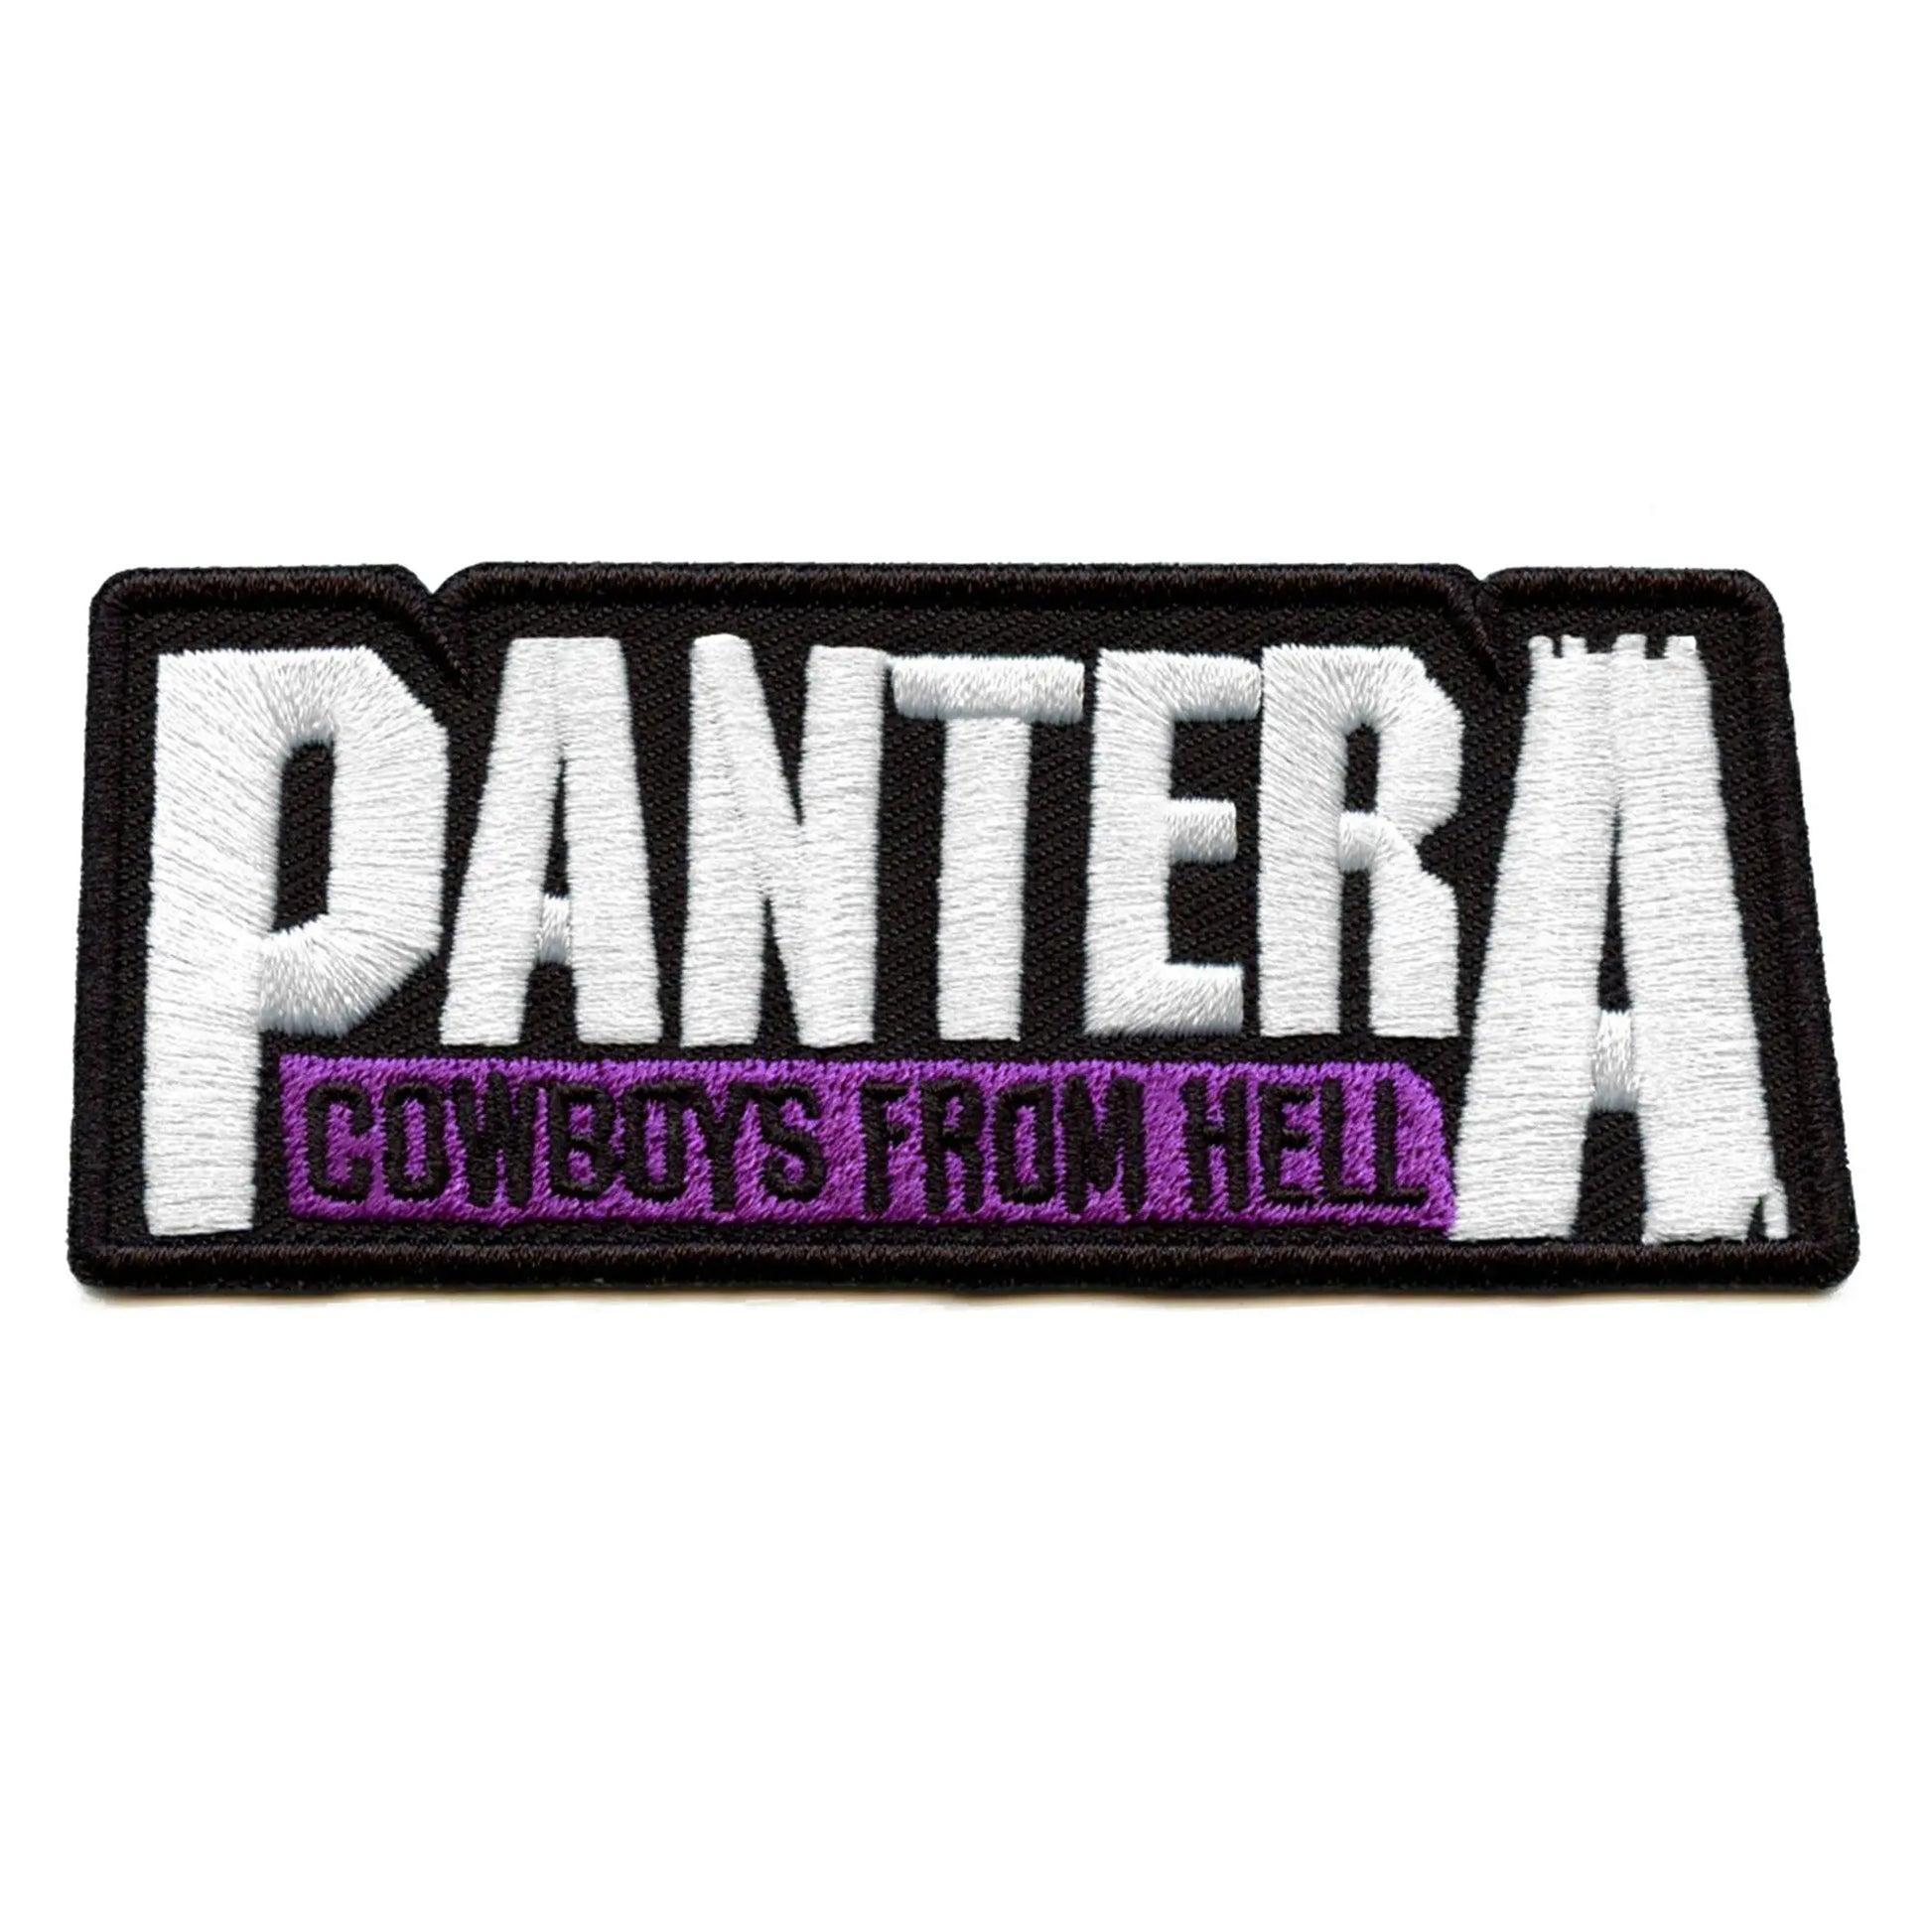 Pantera Cowboys From Hell Patch Heavy Metal Embroidered Iron On